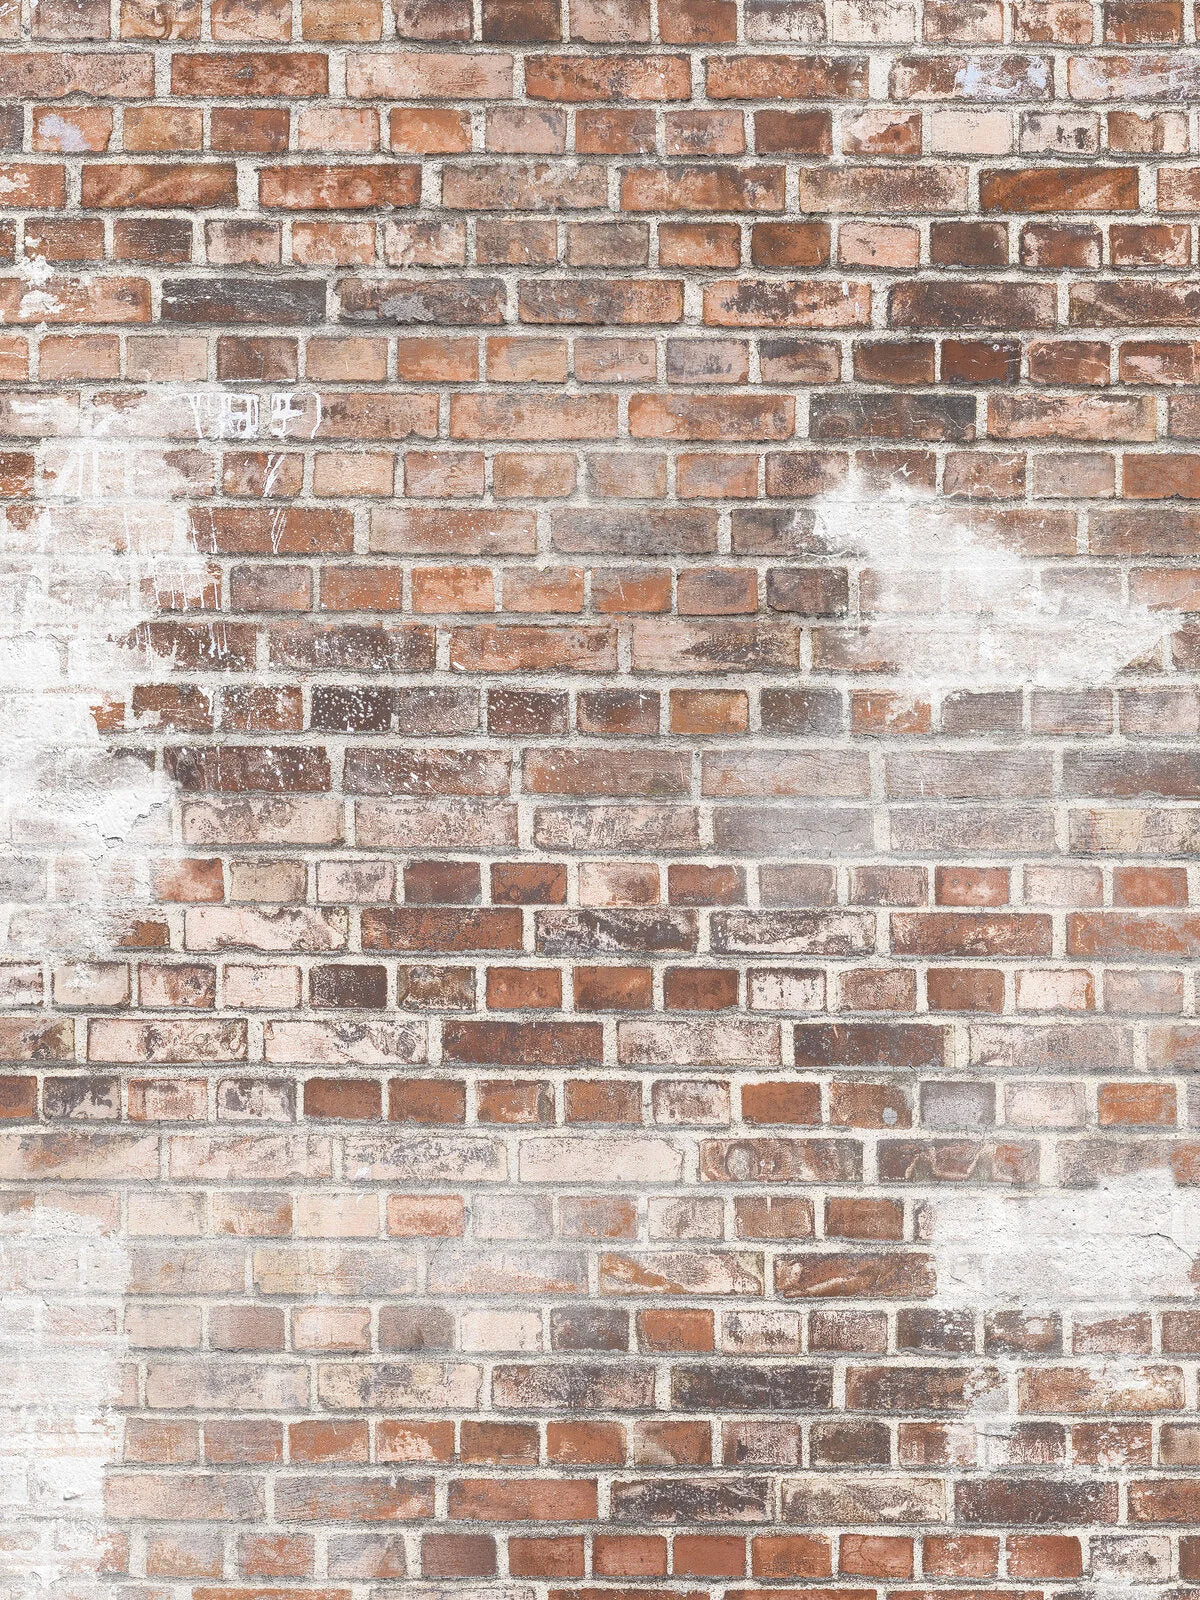 Weathered Bricks wallpaper makes a striking and stylish addition to on-trend interiors. 